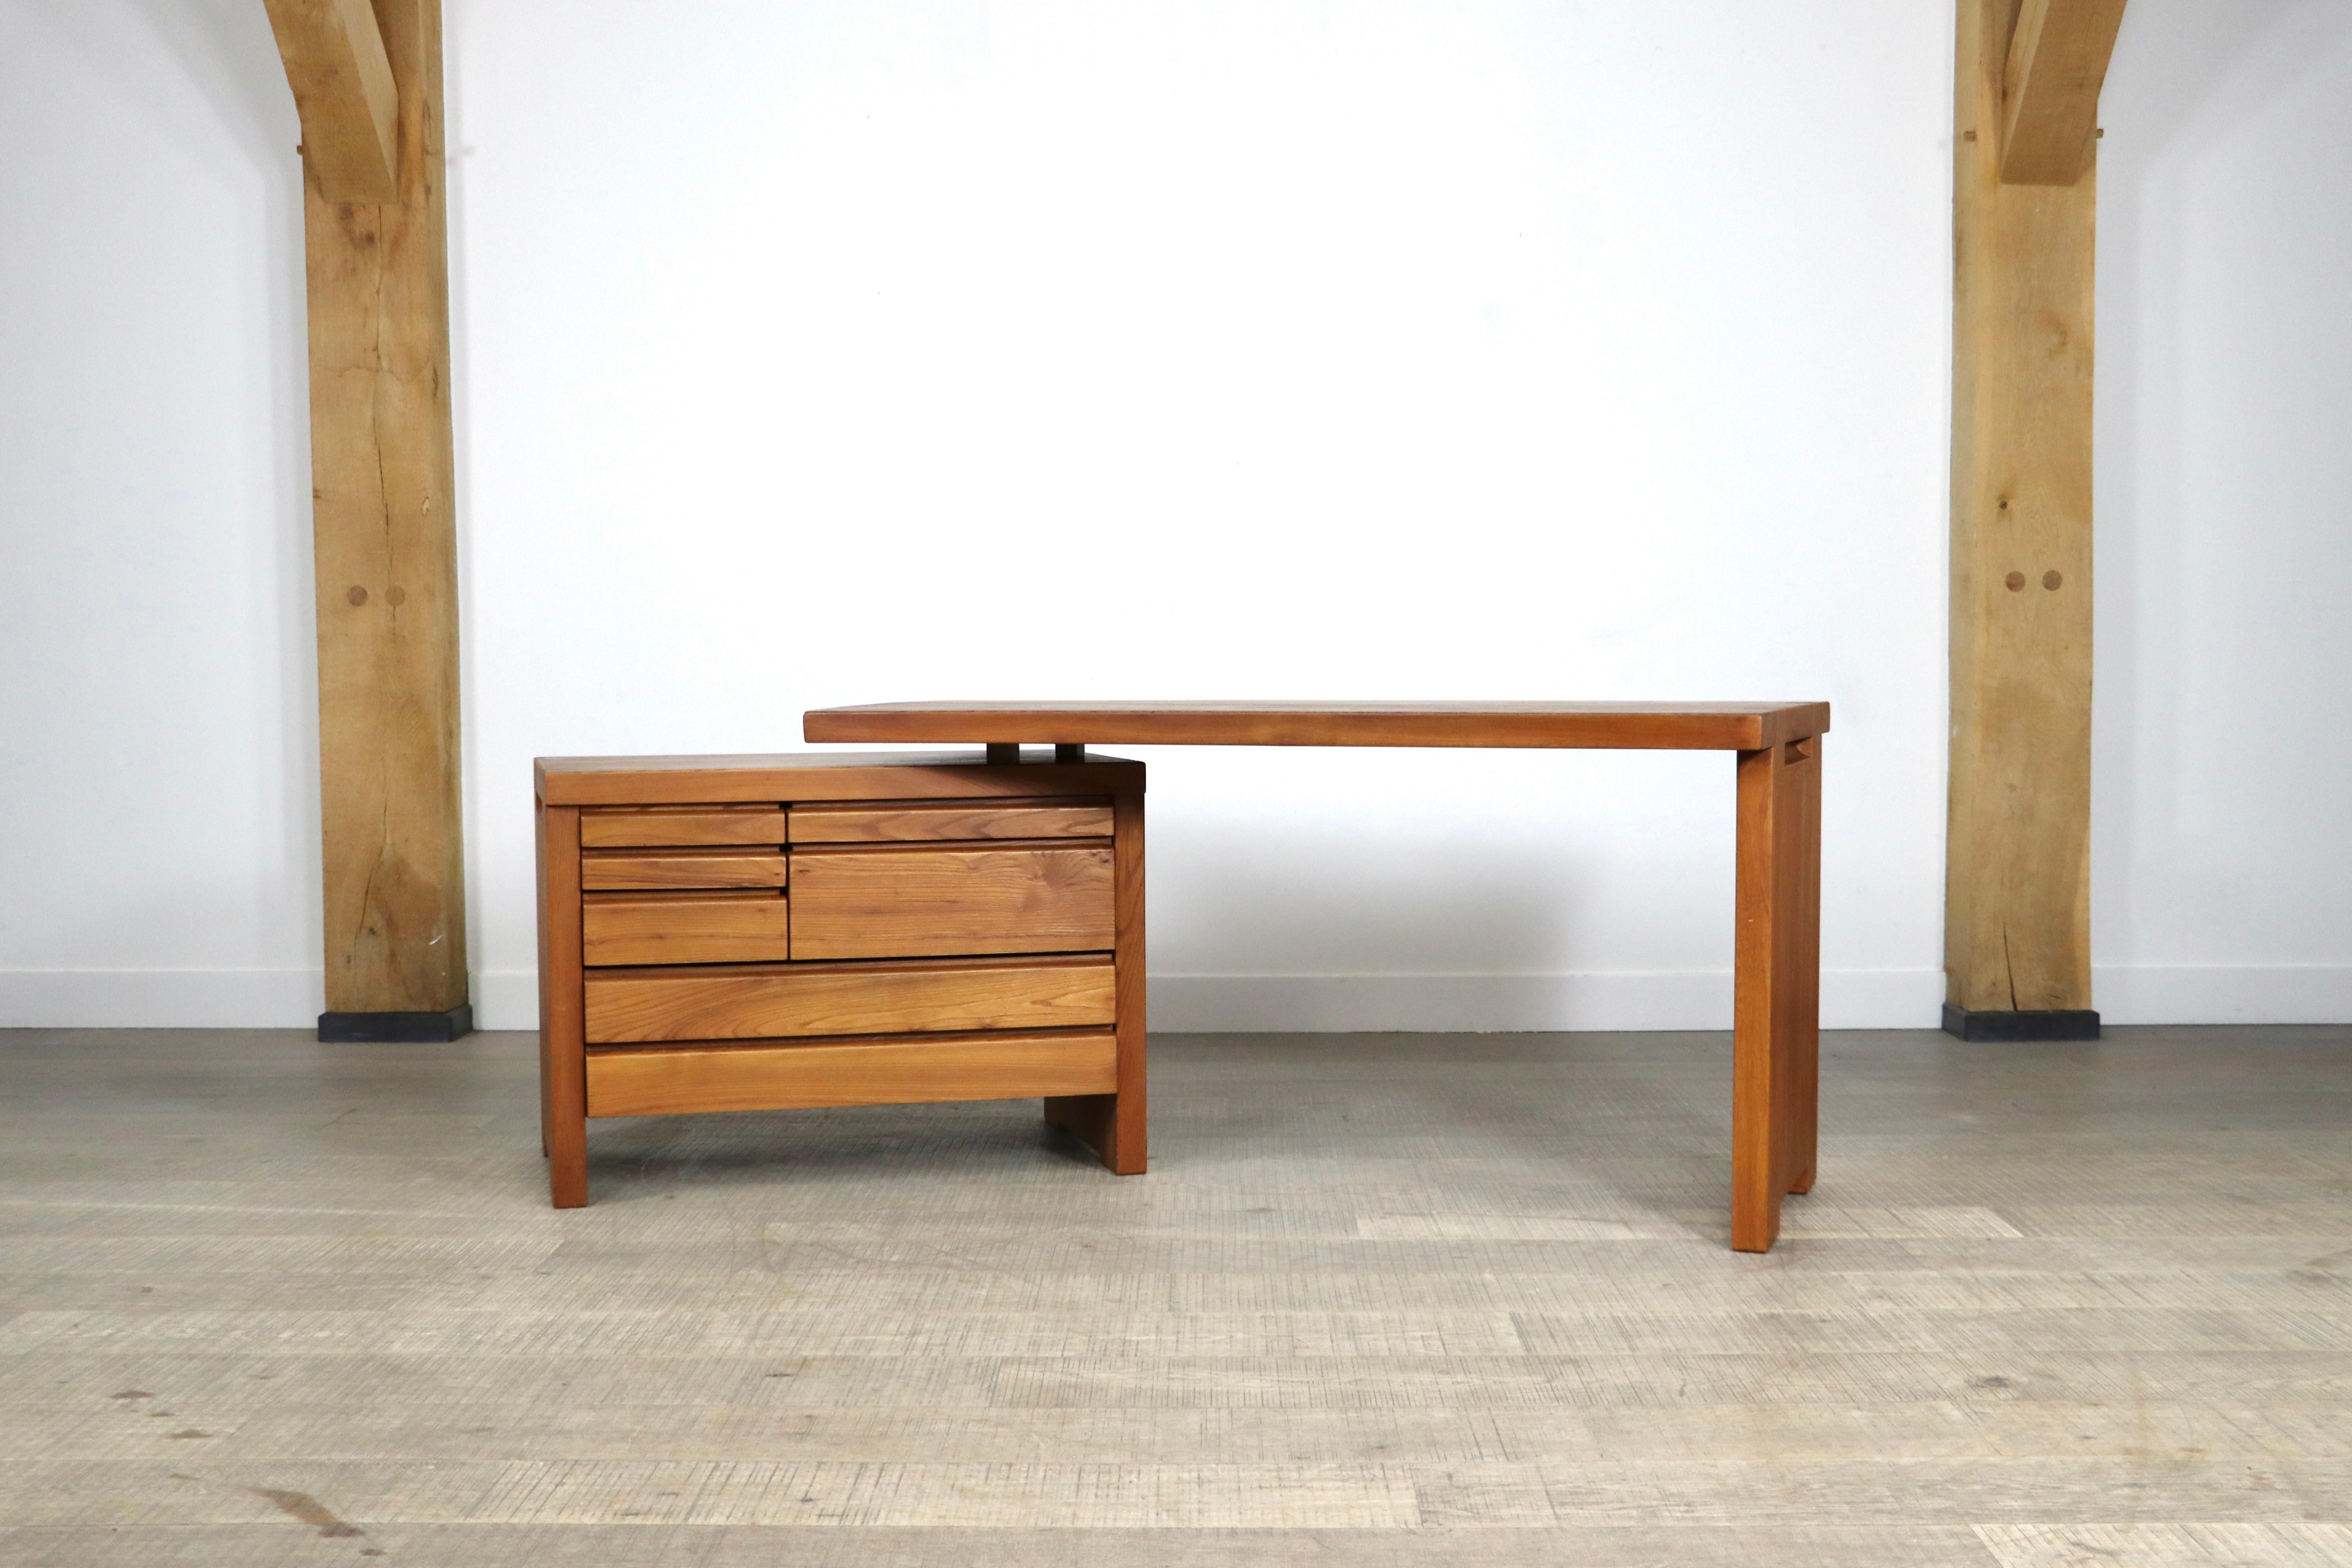 Stunning solid elmwood desk by the French designer Pierre Chapo. With characteristic wood-joints, which are Chapo's trademark. The B19 desk is a desk that can be freestanding, as the drawers can be placed to your personal liking, both in the front